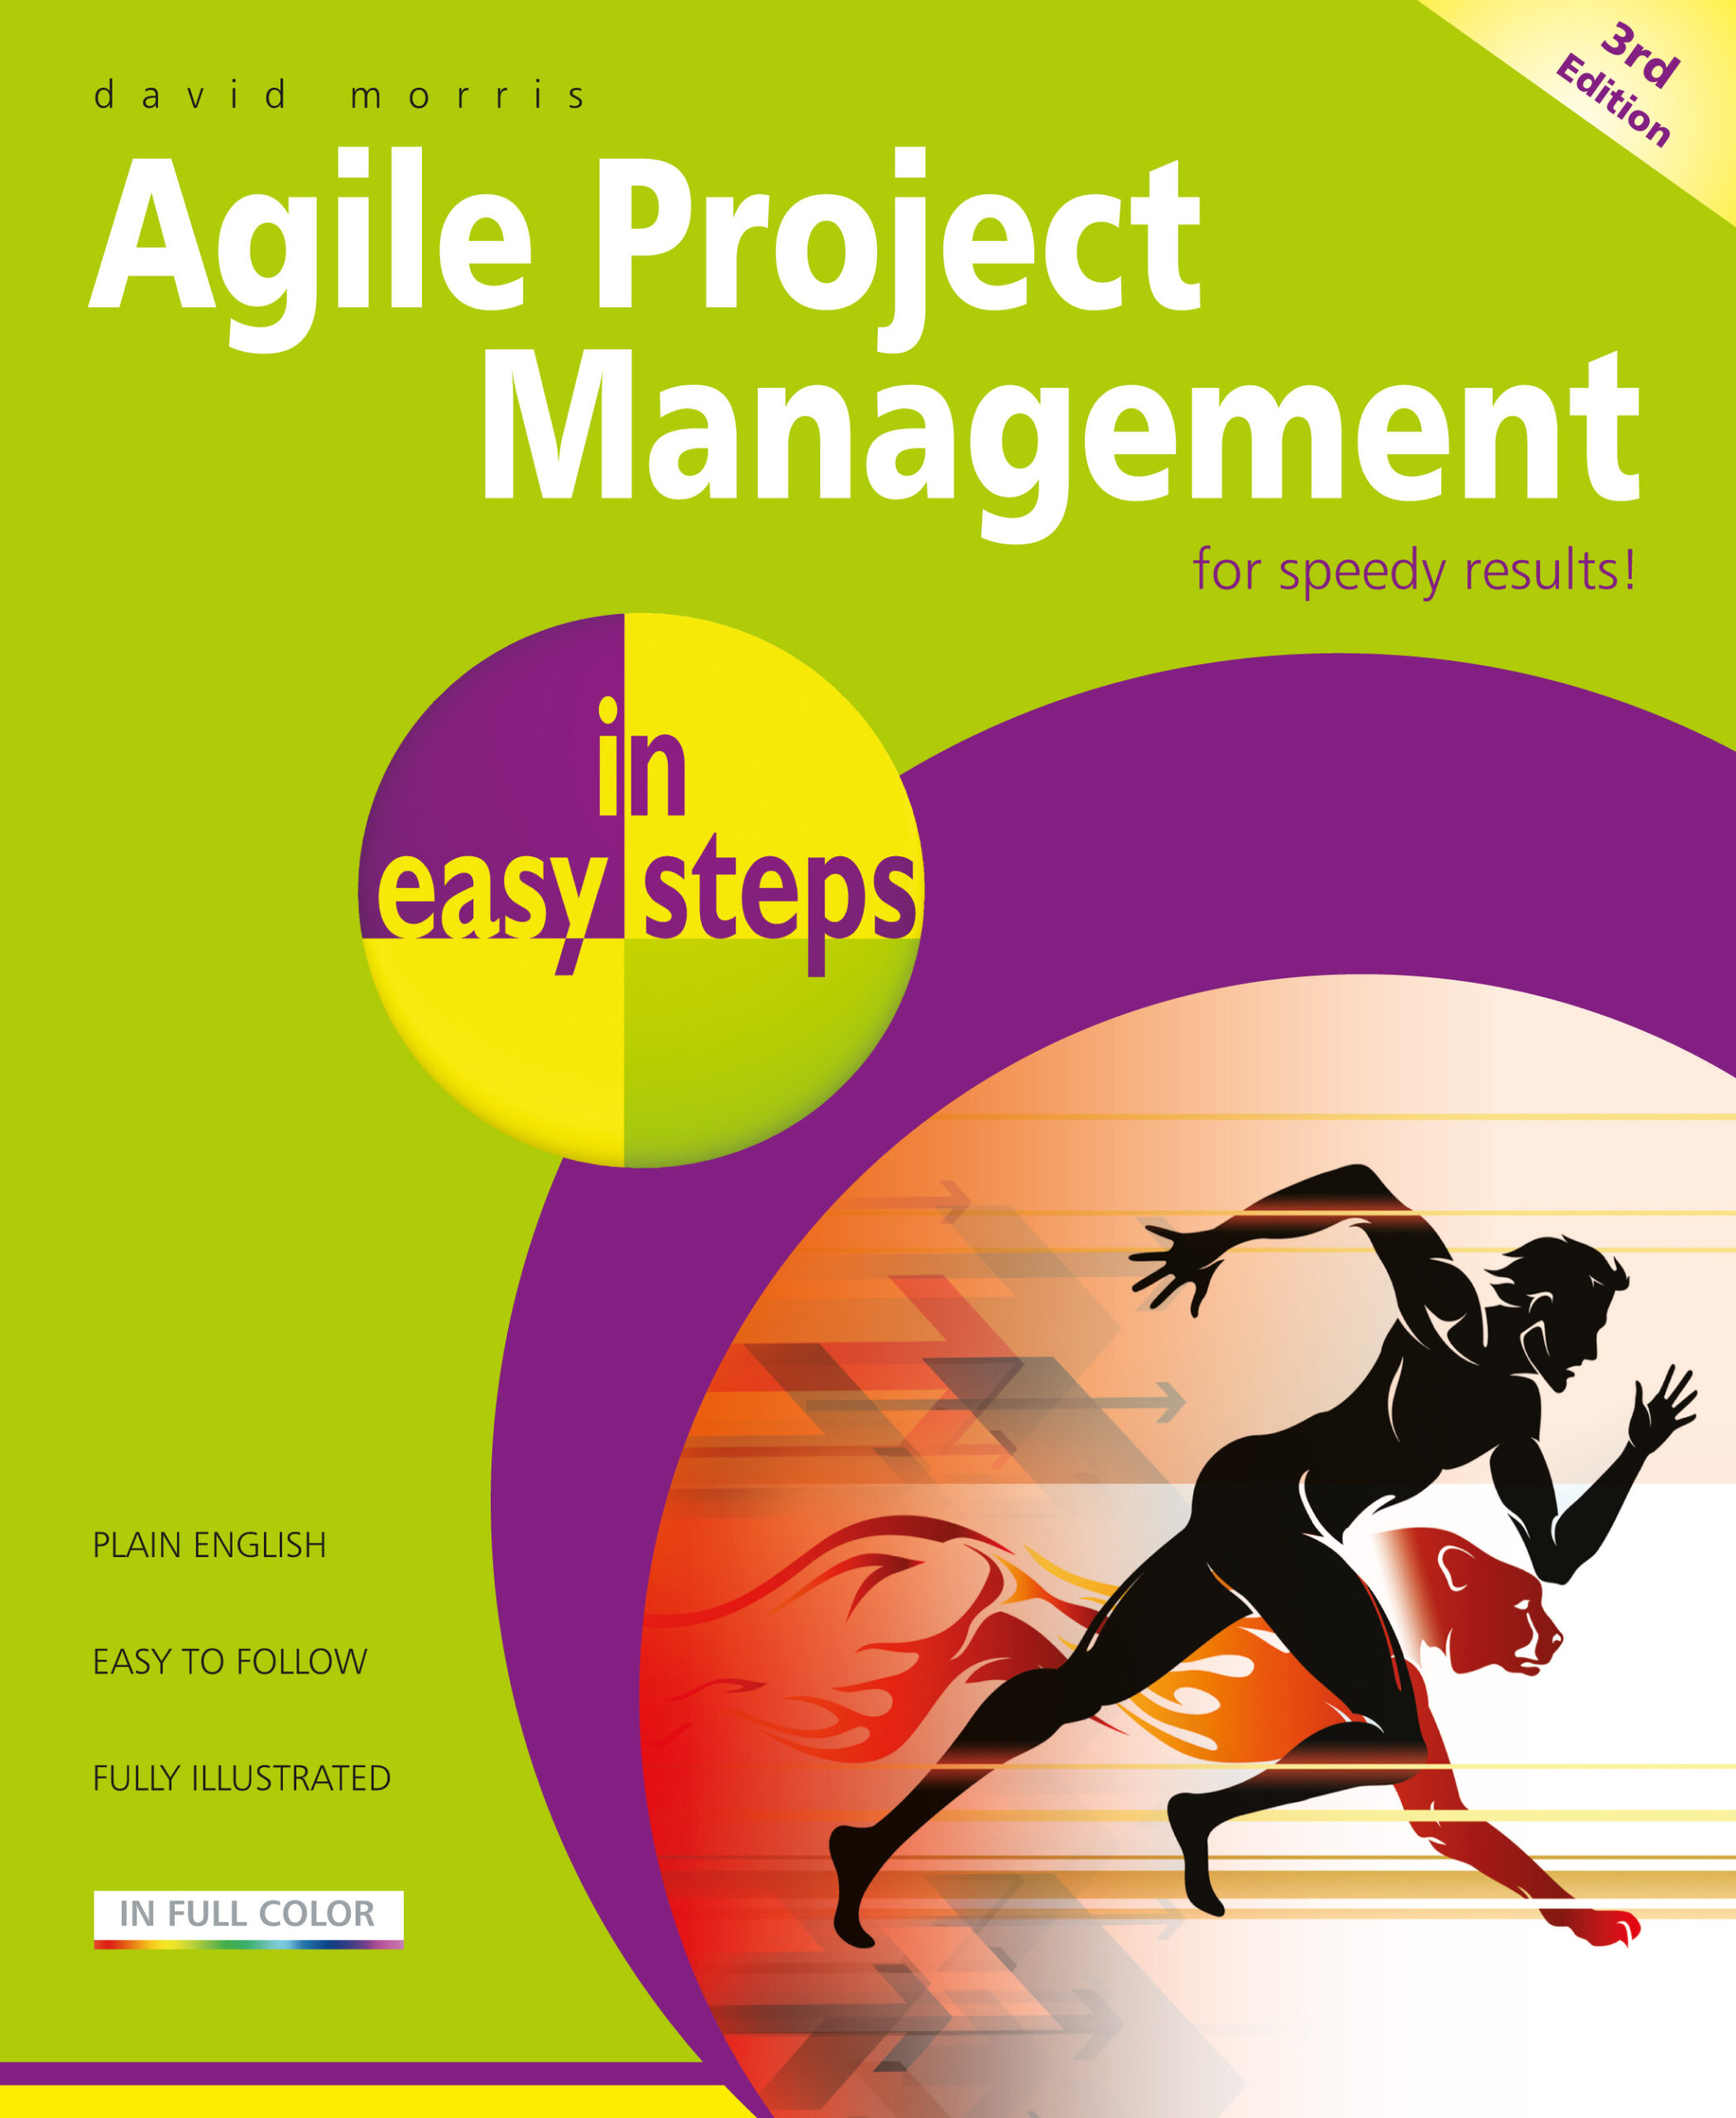 Agile Project Management in easy steps